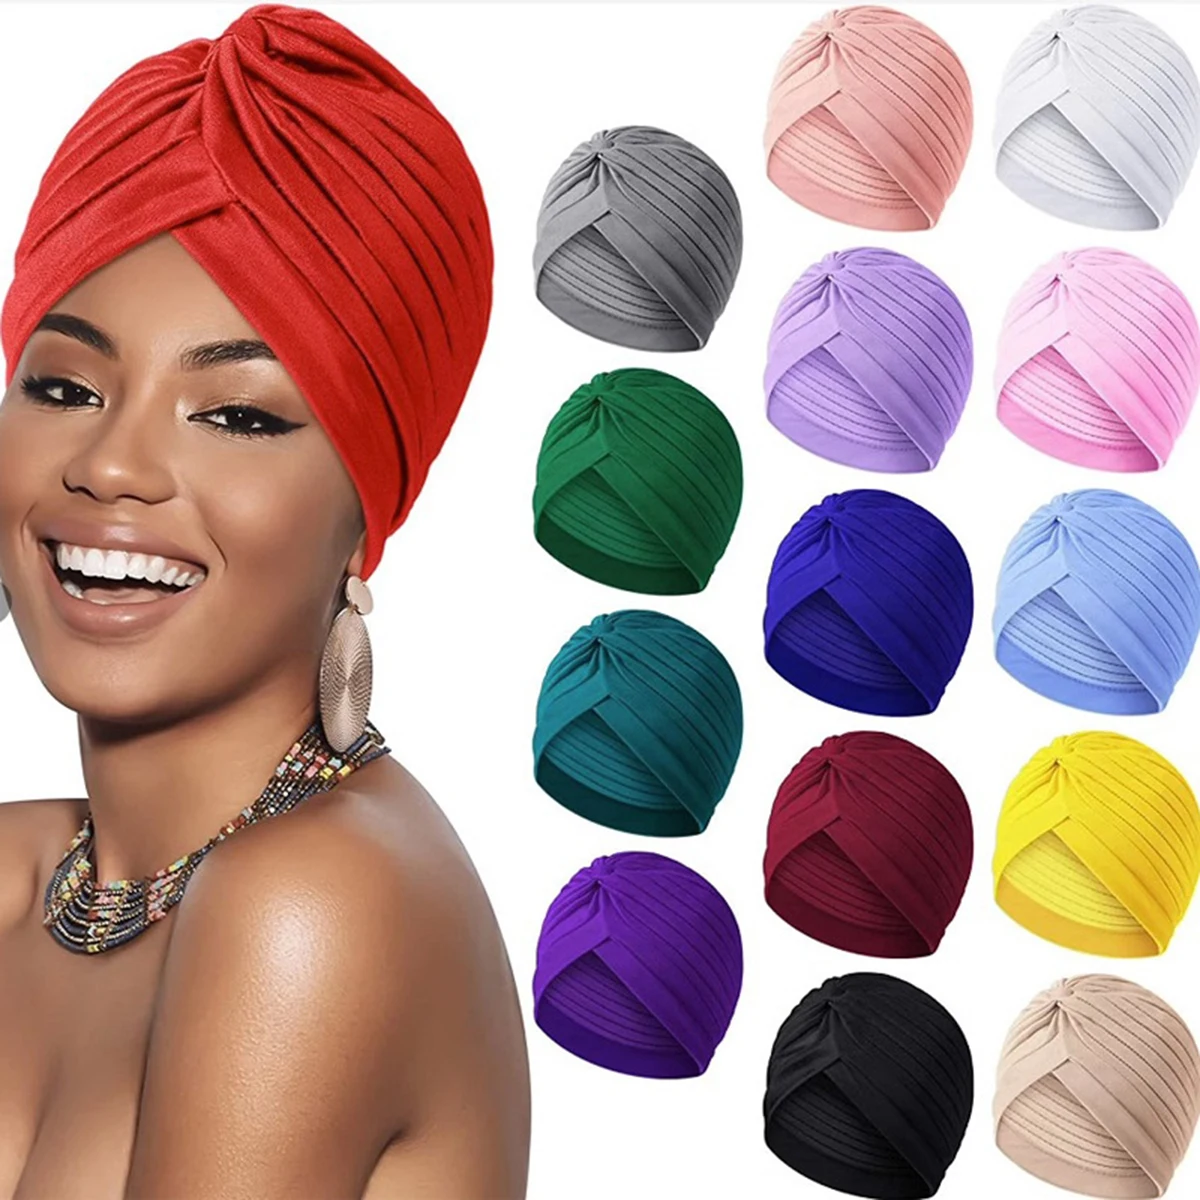 

Muslim Women Soft Stretch Turban Hat Pre-Tied Head Scarf Printed Ladiess Cotton Cancer Chemo Cap Inner Hijabs Hair Accessories